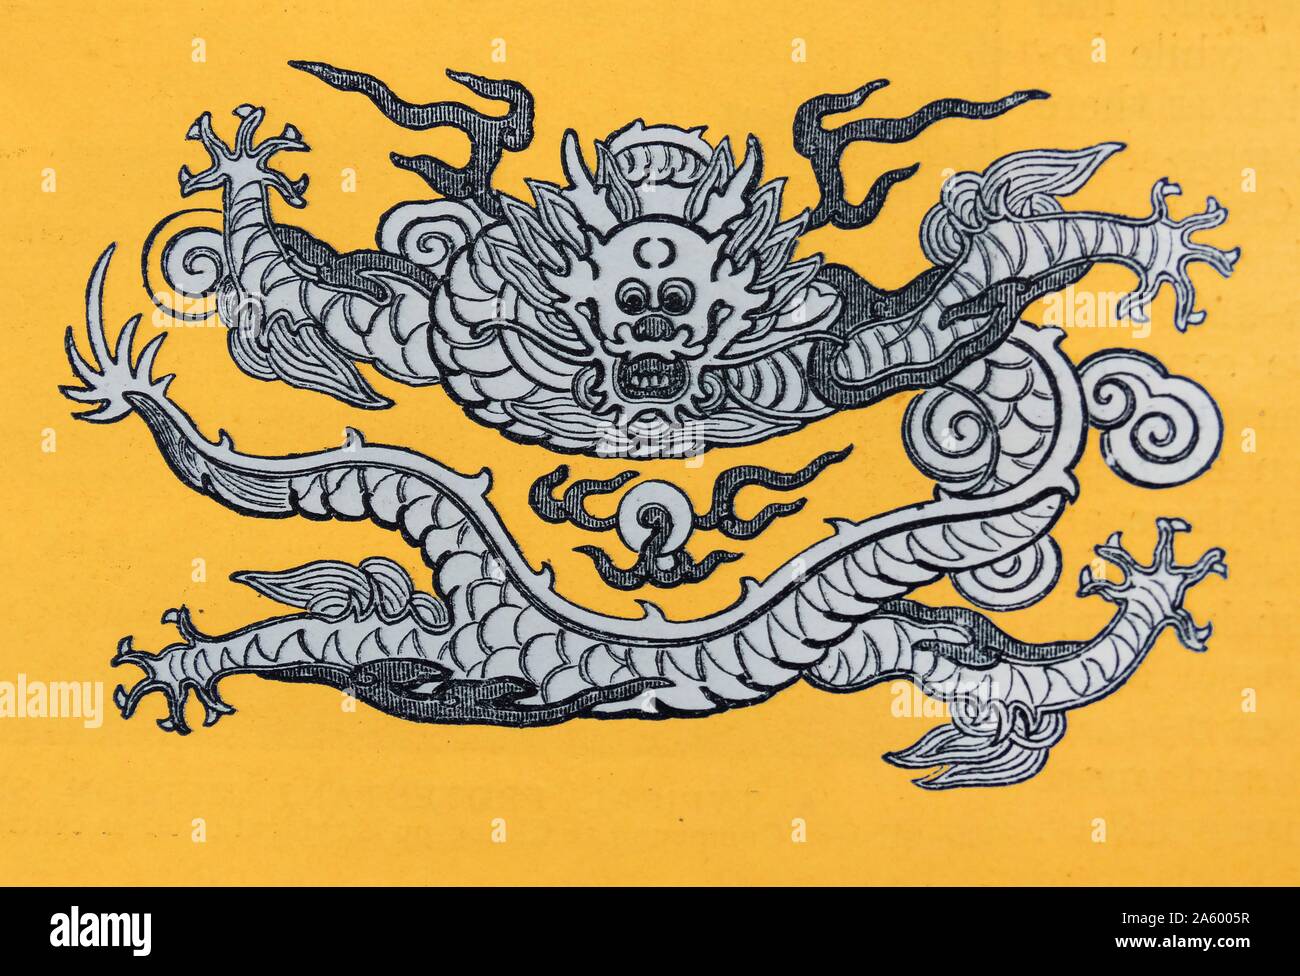 Chinese dragon emblem on a yellow background; from a 1900 illustration Stock Photo